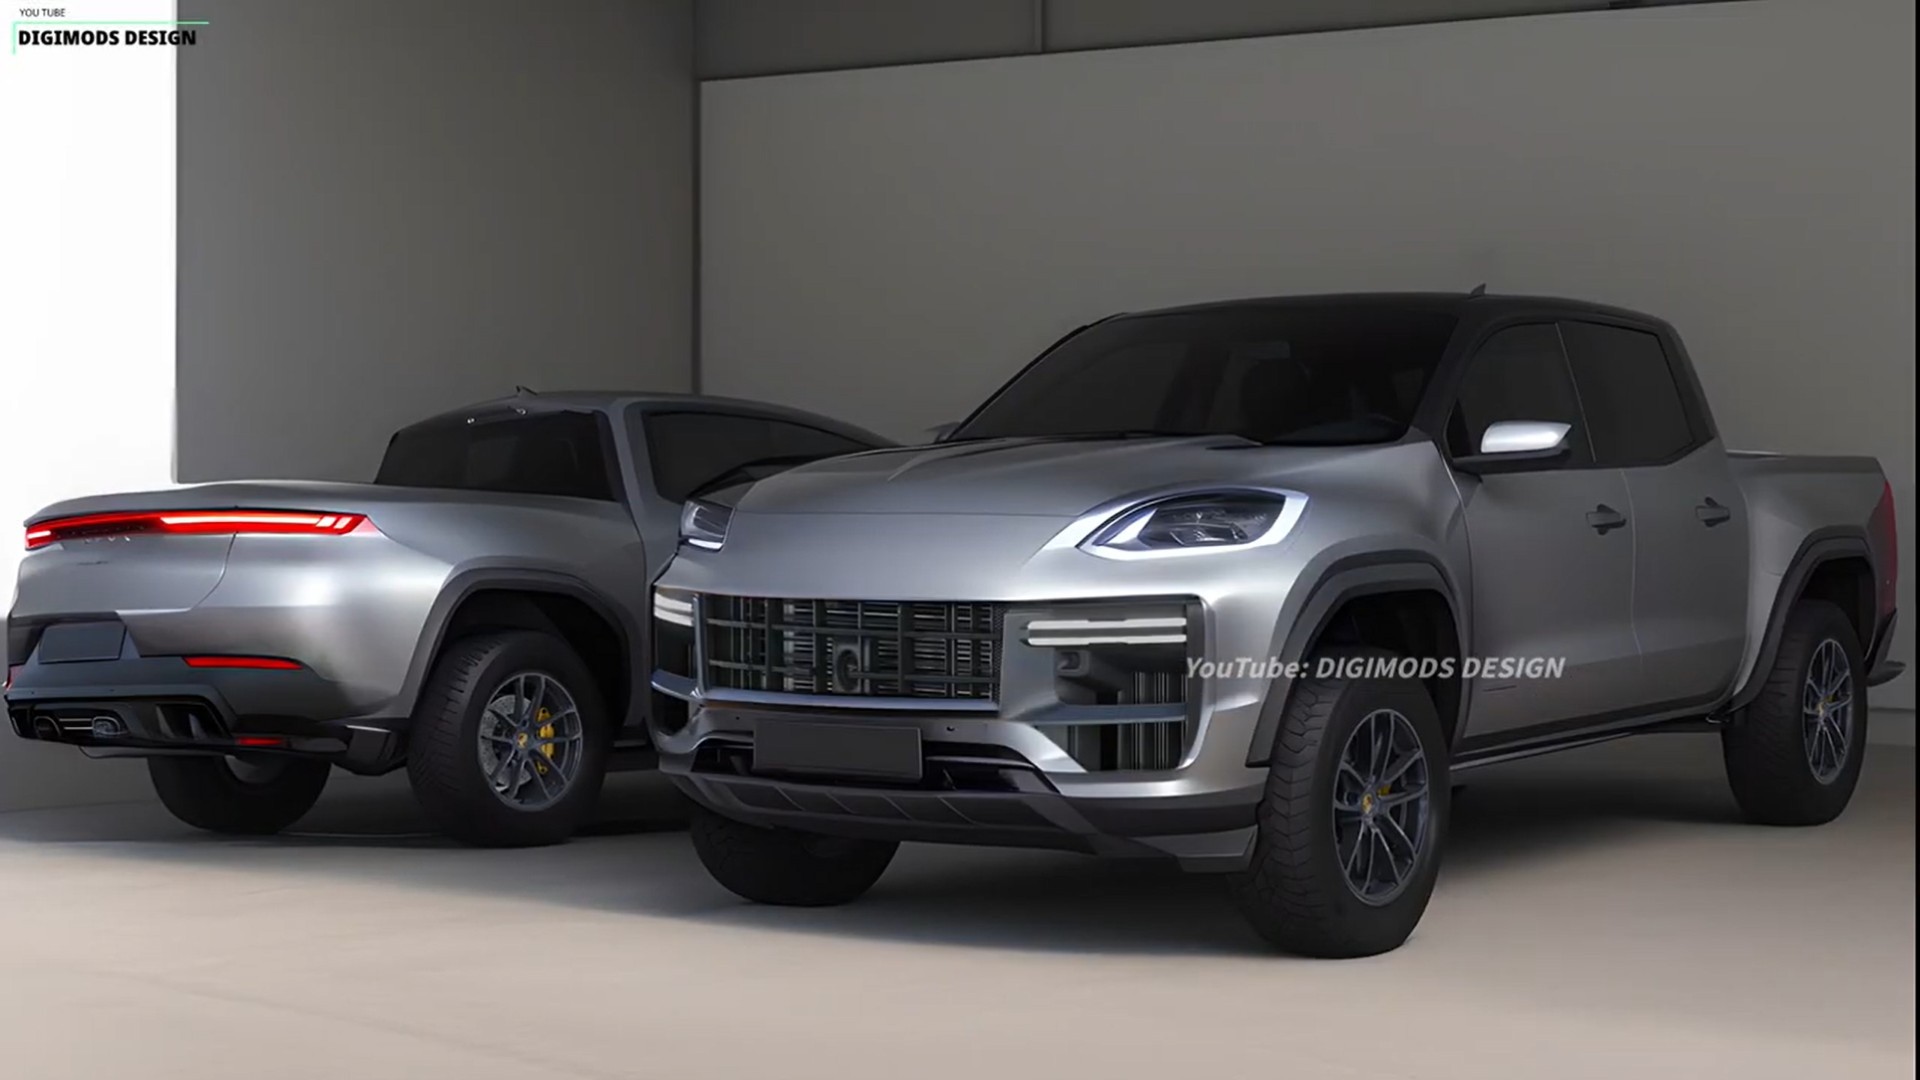 The Porsche Cayenne Pickup Truck Is Probably Never Going To Happen In